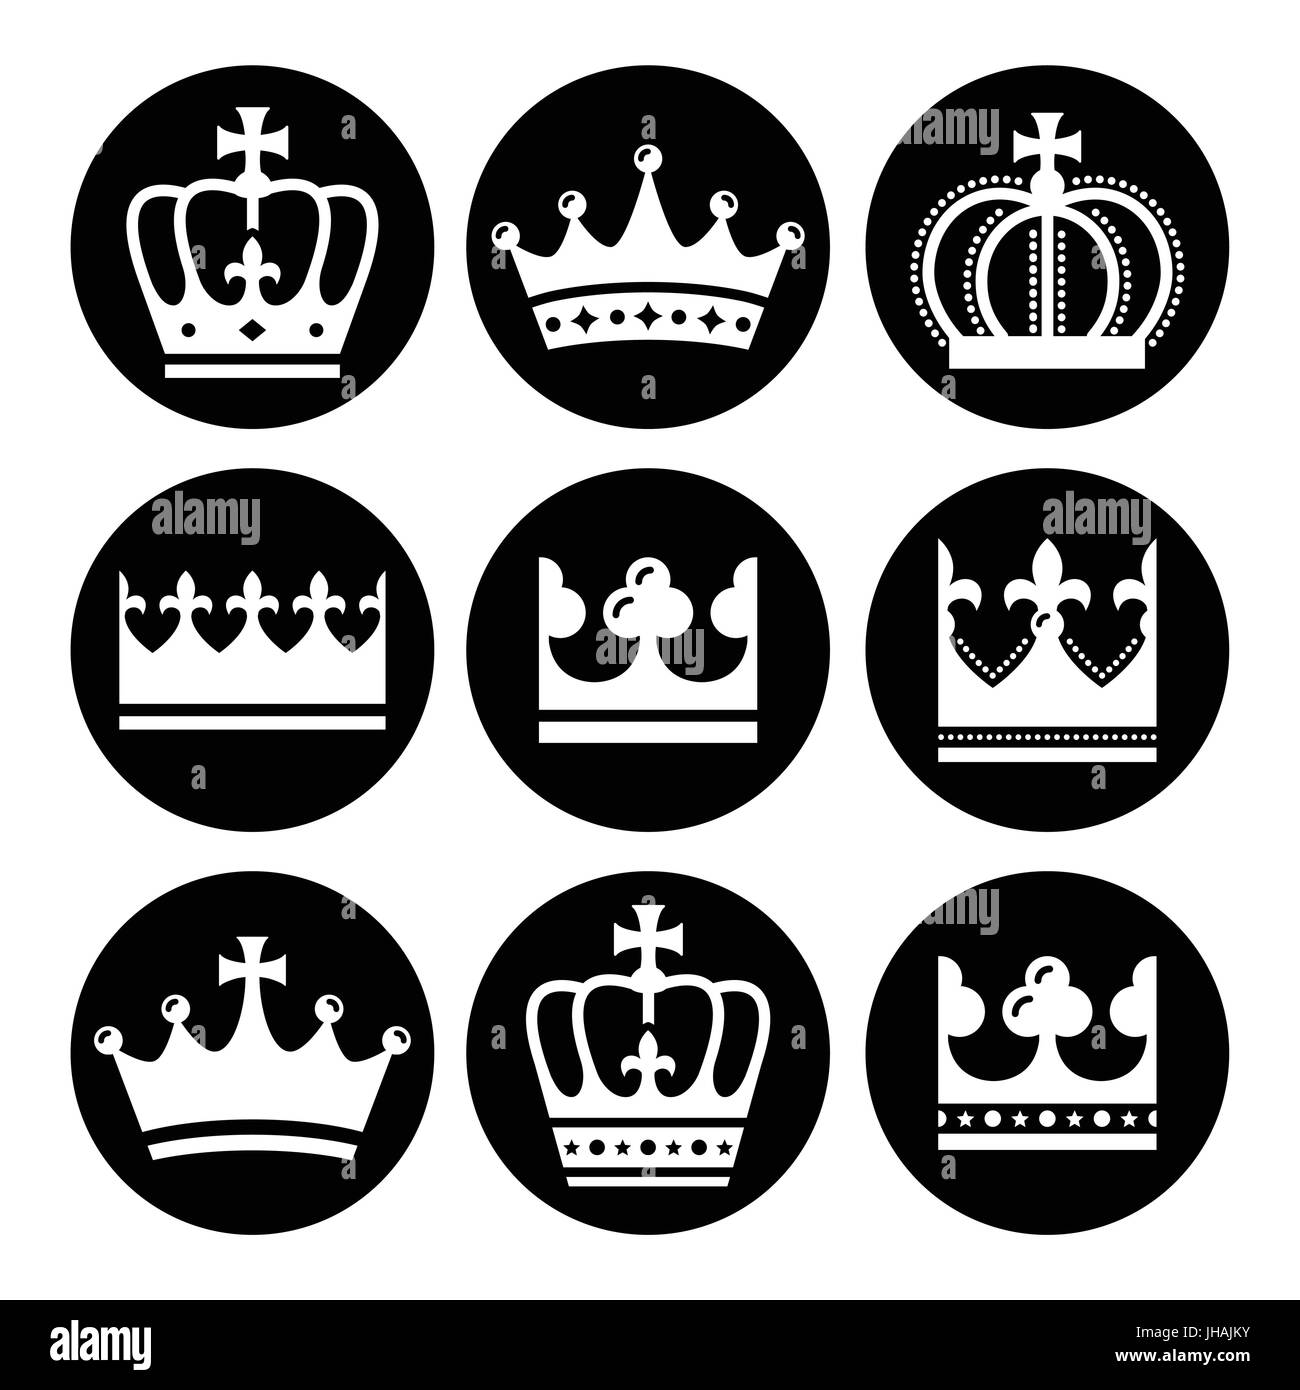 Crown, royal family - round icons set Stock Vector